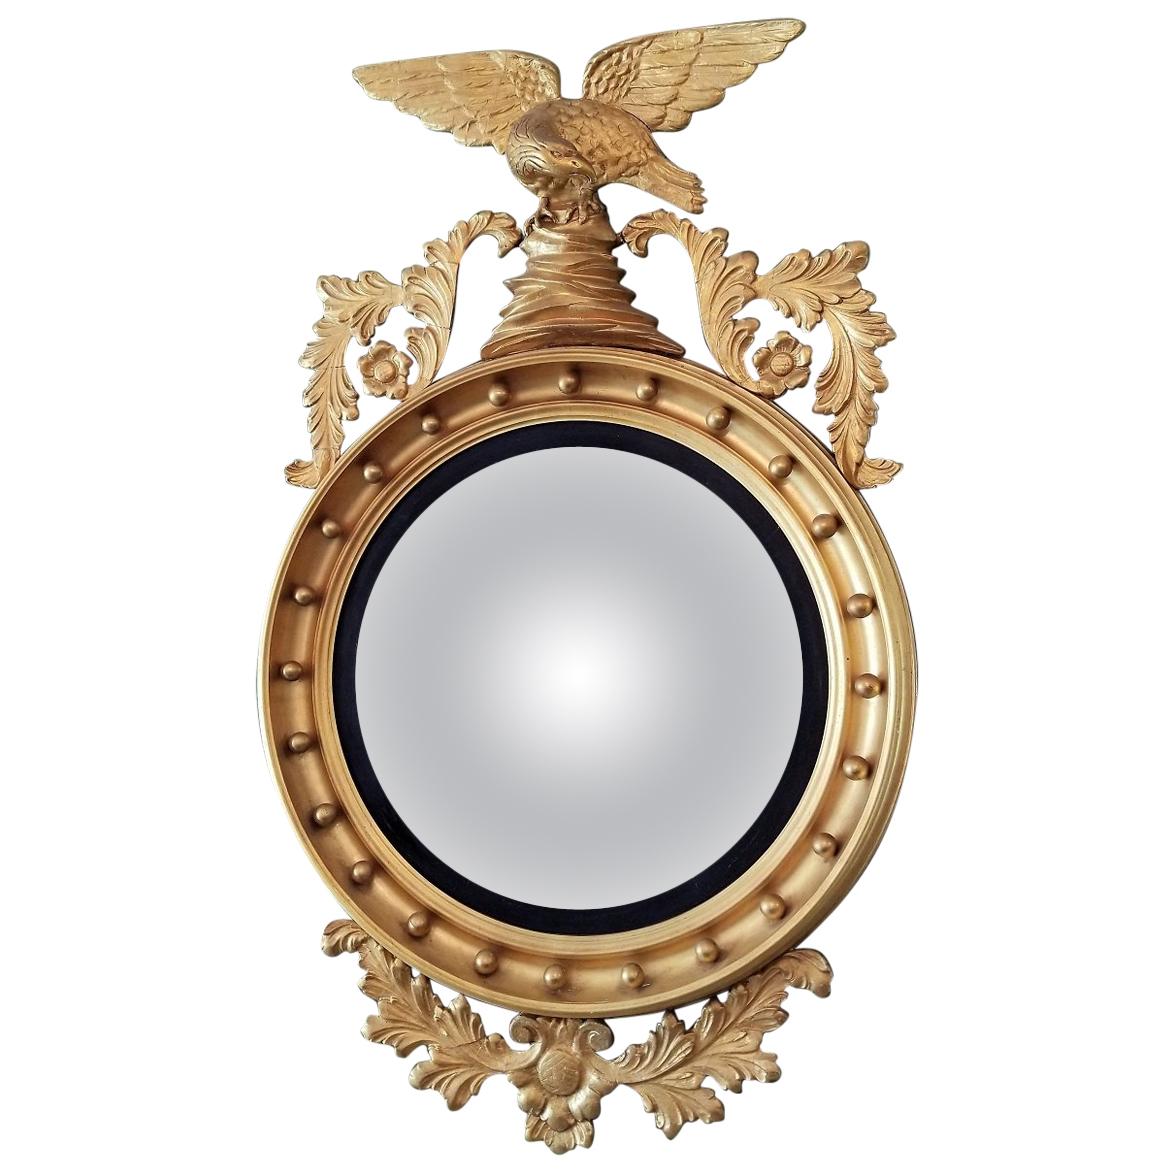 Early 19th Century Federal Eagle Wood and Gesso Gilded Convex Mirror